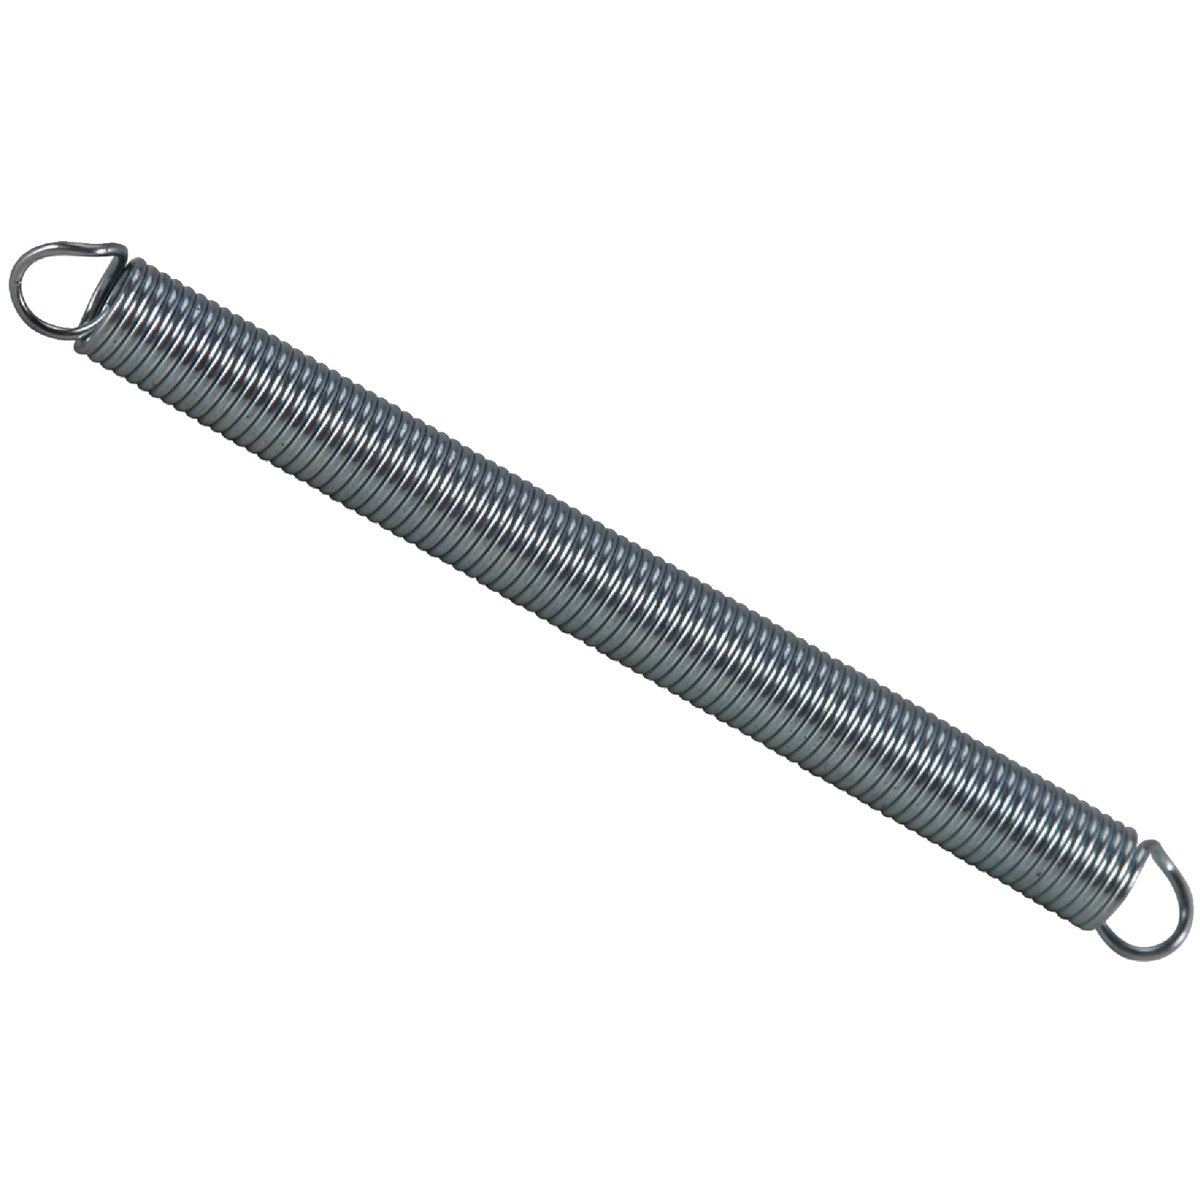 Century Spring 1-1/2 In. x 1/8 In. Extension Spring (2 Count)